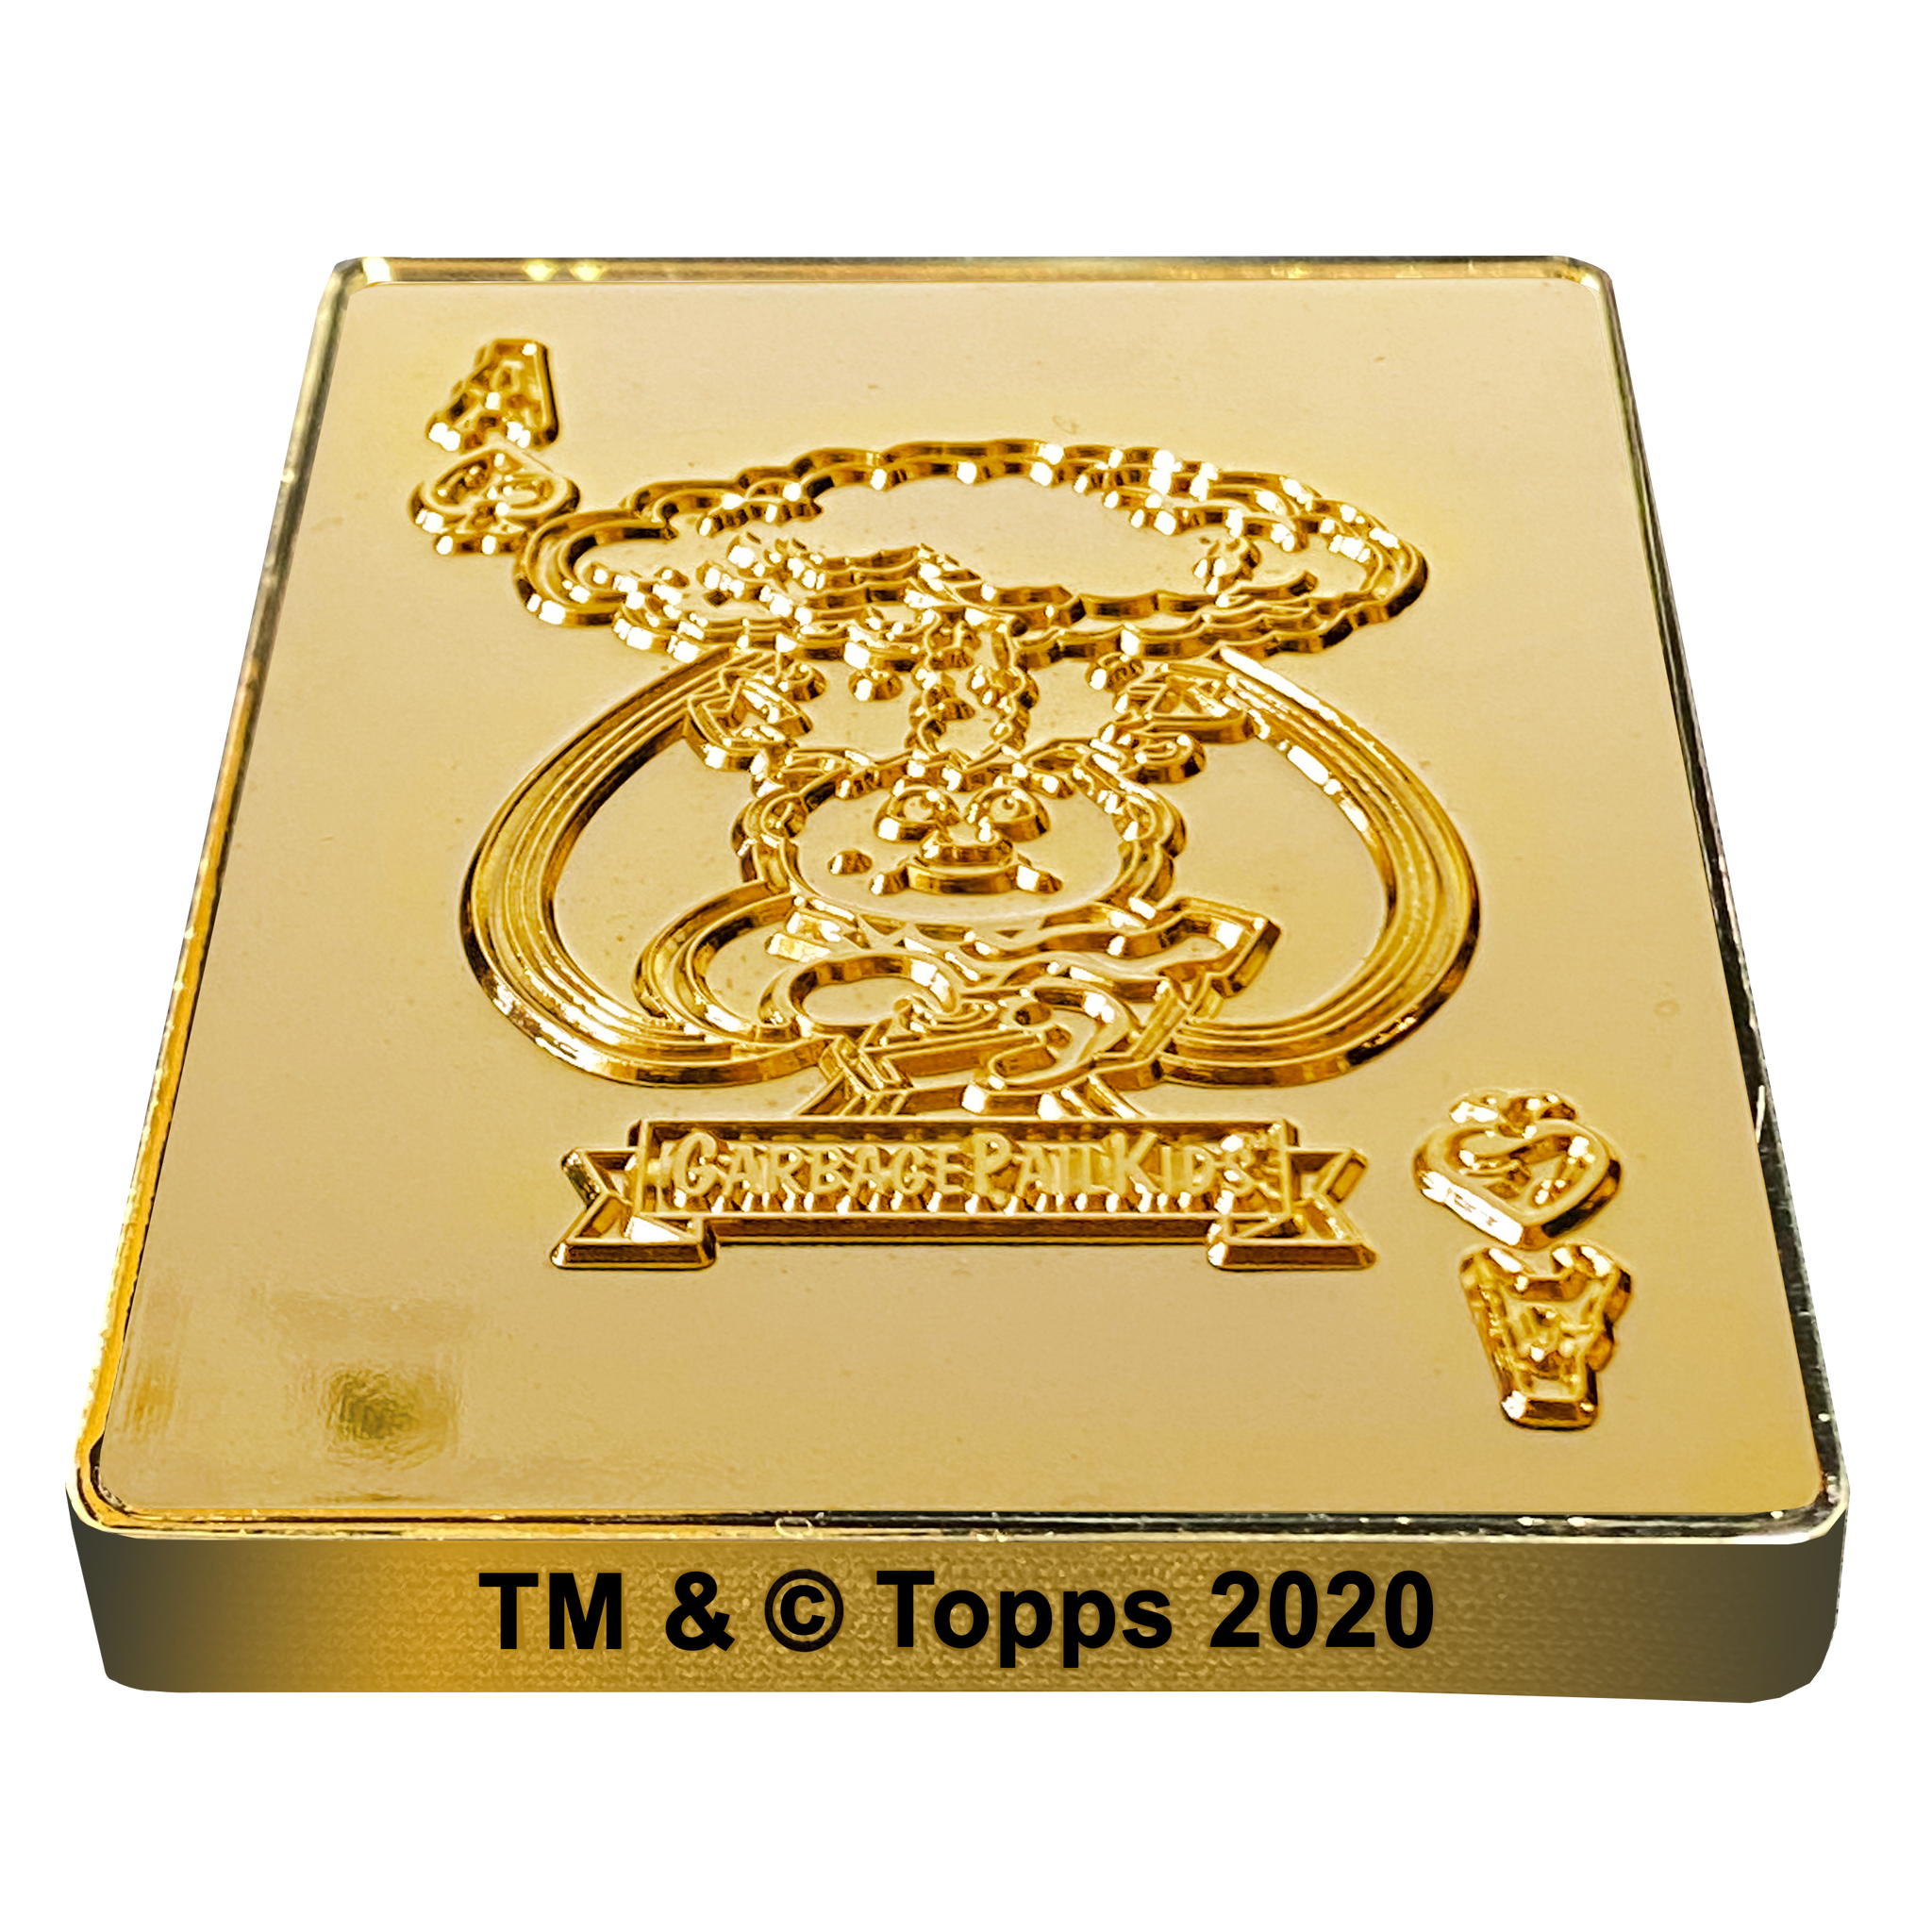 Adam Bomb 24KT Gold Plated GPK Challenge Coin Officially Licensed Topps Garbage Pail Kids Playing Cards Challenge Coin